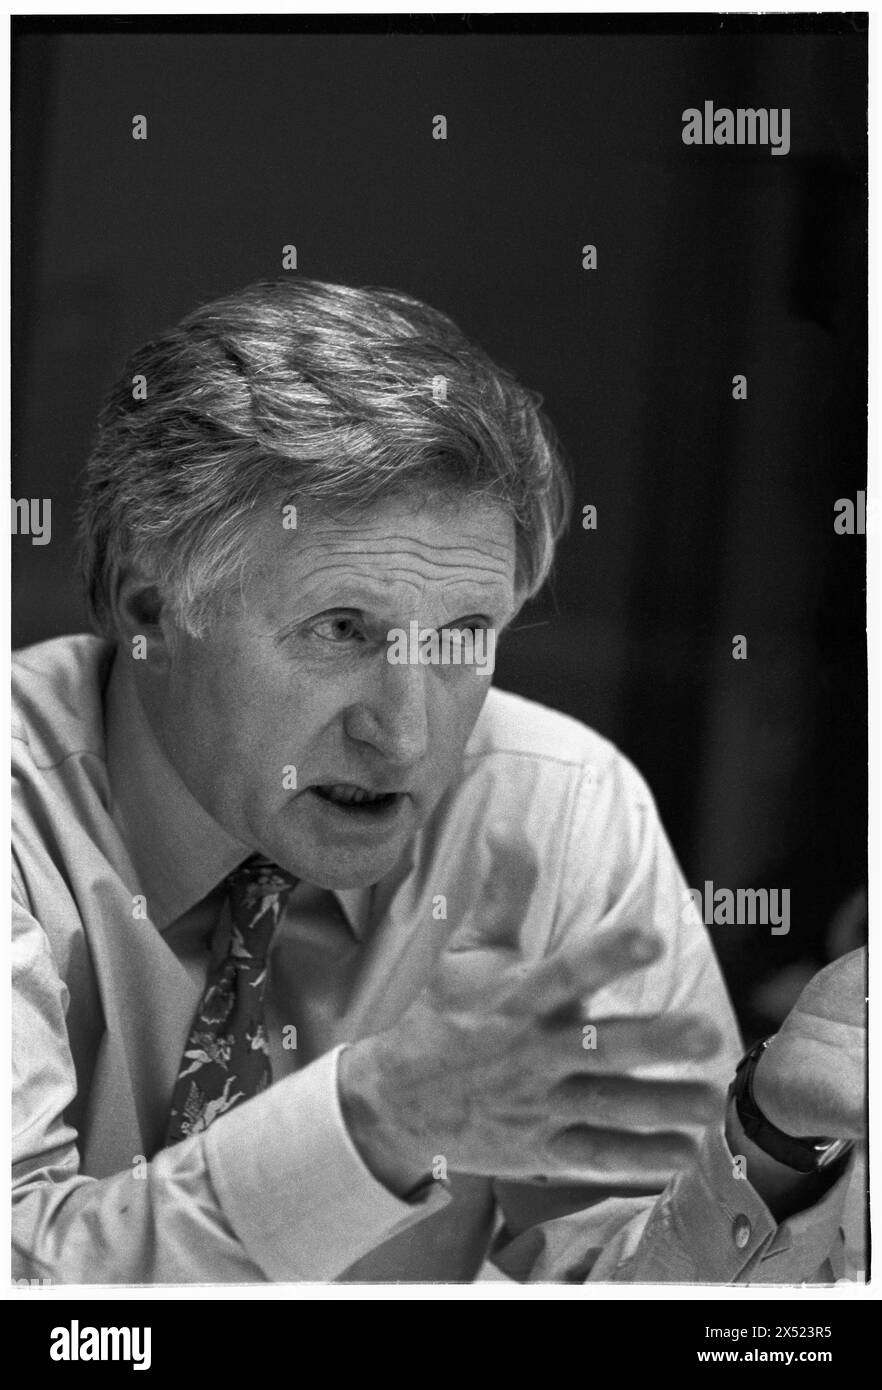 DAVID DIMBLEBY, BACKSTAGE, QUESTION TIME, 1994: A portriat of TV presenter and news anchor David Dimbleby just after he took over as the new presenter of Question Time backstage after the show at ITV Studios, Culverhouse Cross in Cardiff, Wales, UK on 17 March 1994. Photo: Rob Watkins. Stock Photo